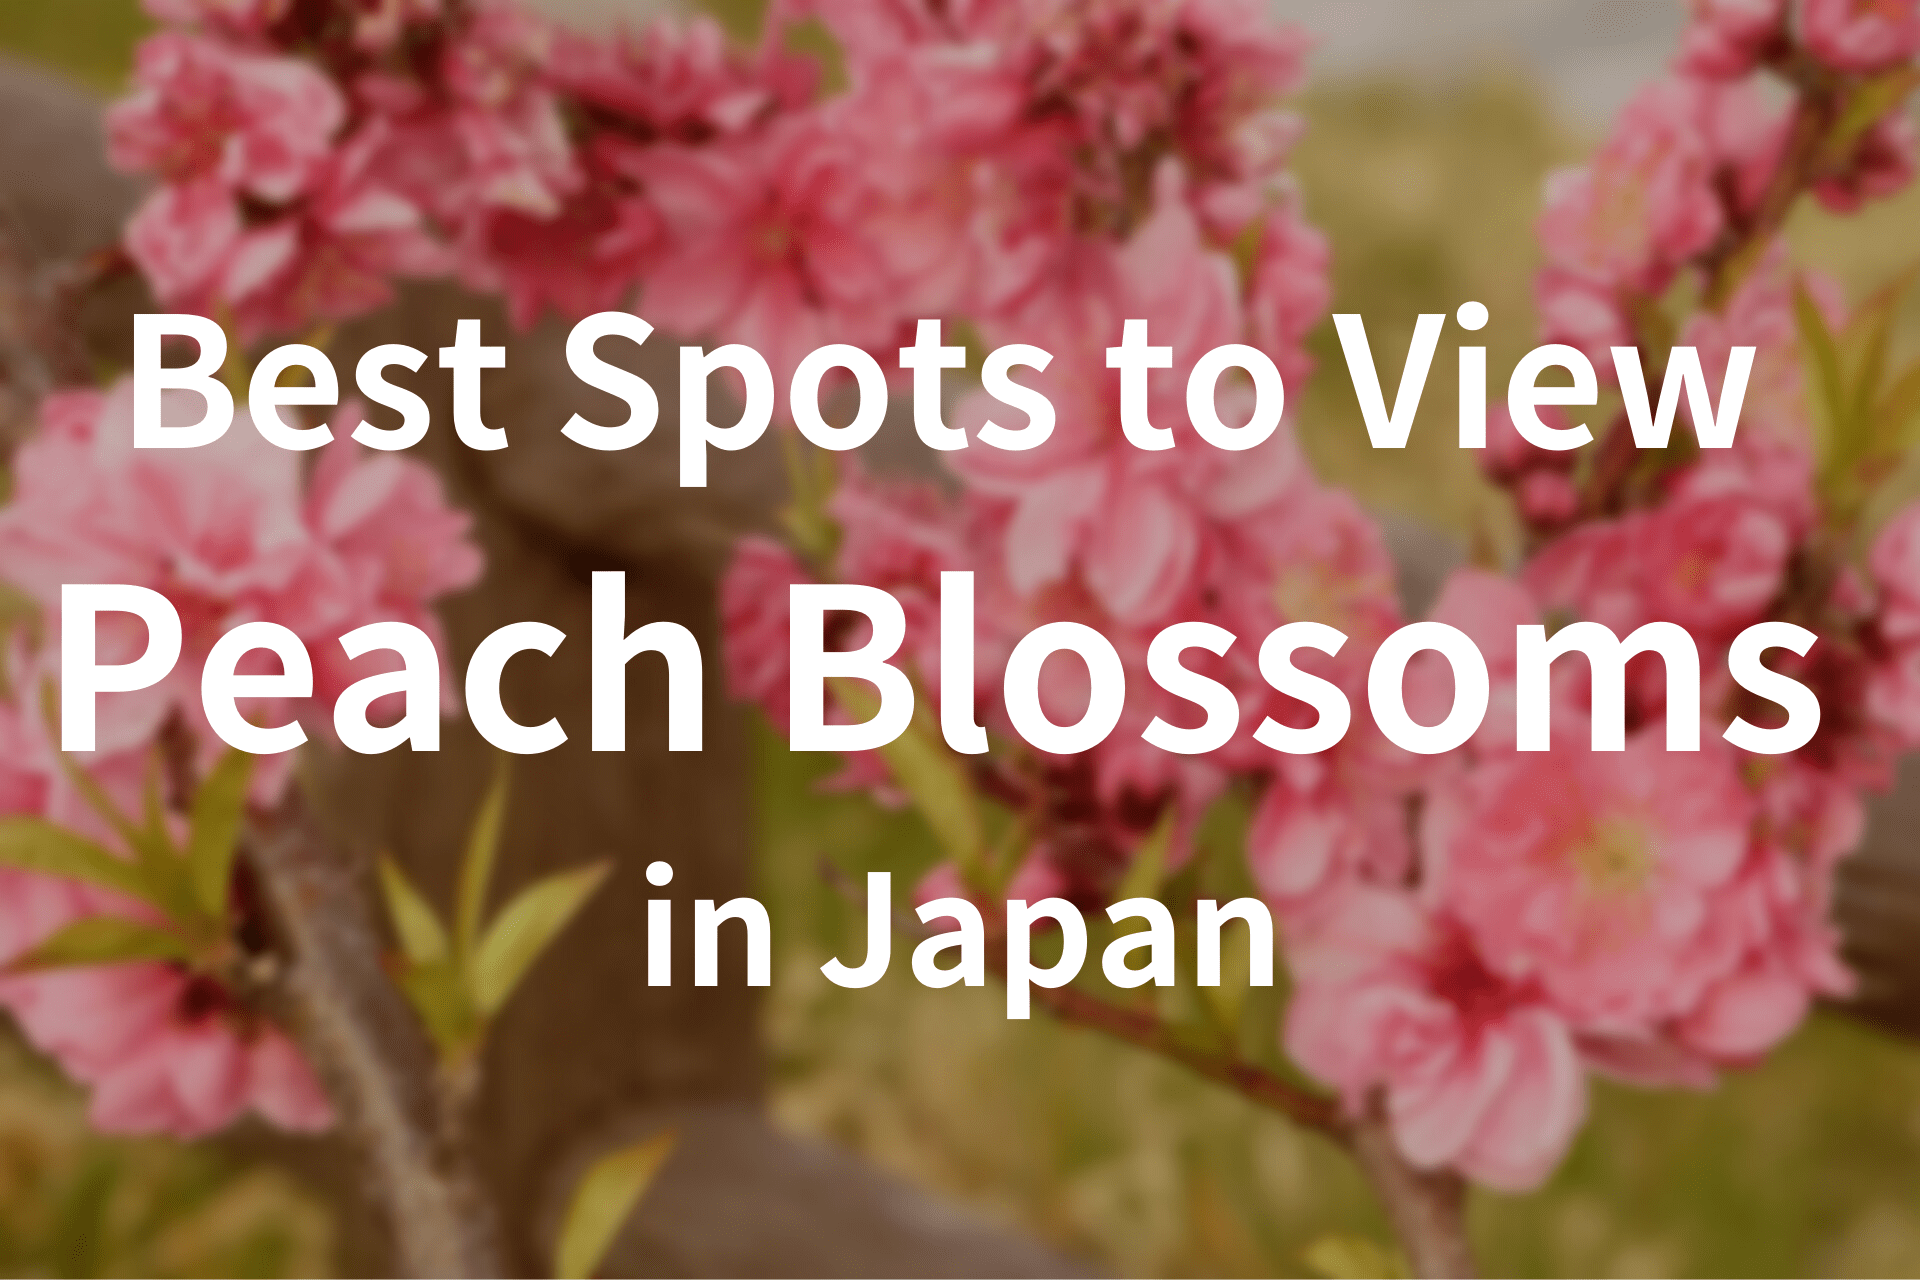 10 Best Spots to View Peach Blossoms in Japan